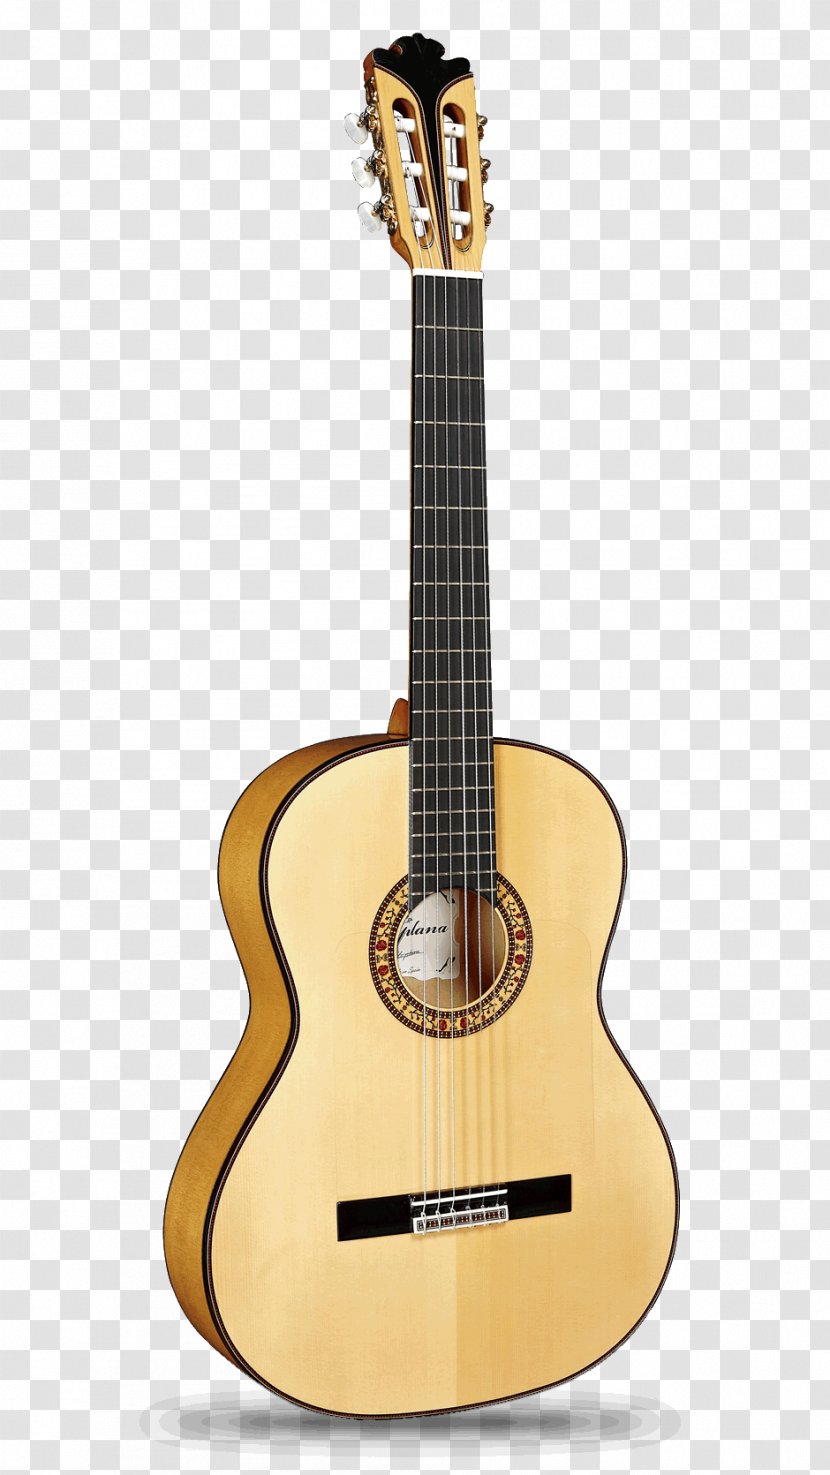 C. F. Martin & Company Acoustic Guitar Acoustic-electric Musical Instruments - Heart - Flamenco Transparent PNG